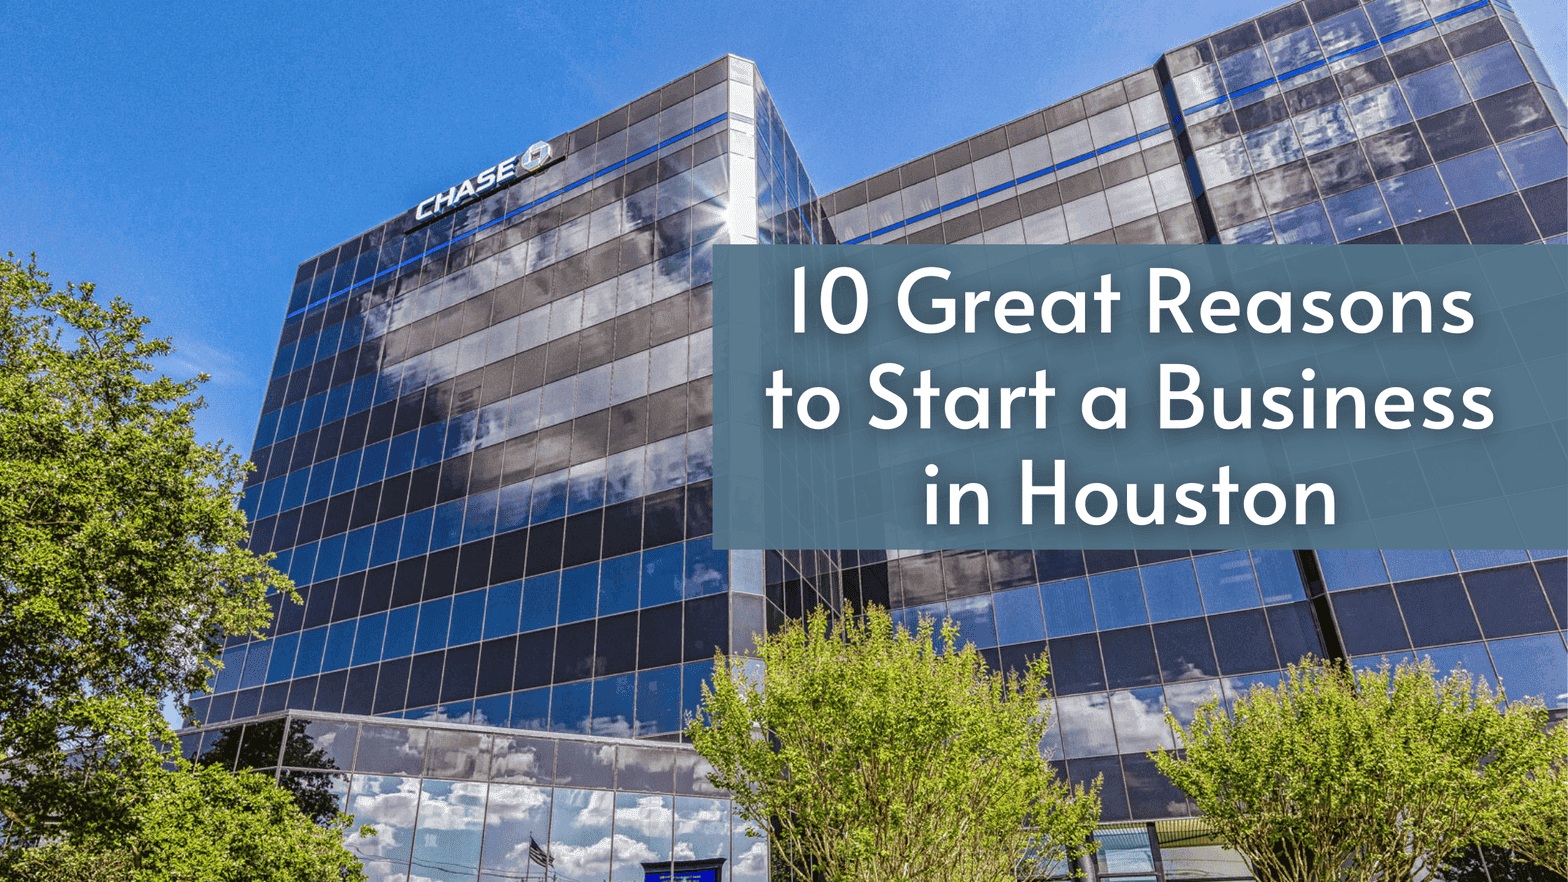 10 Great Reasons to Start a Business in Houston